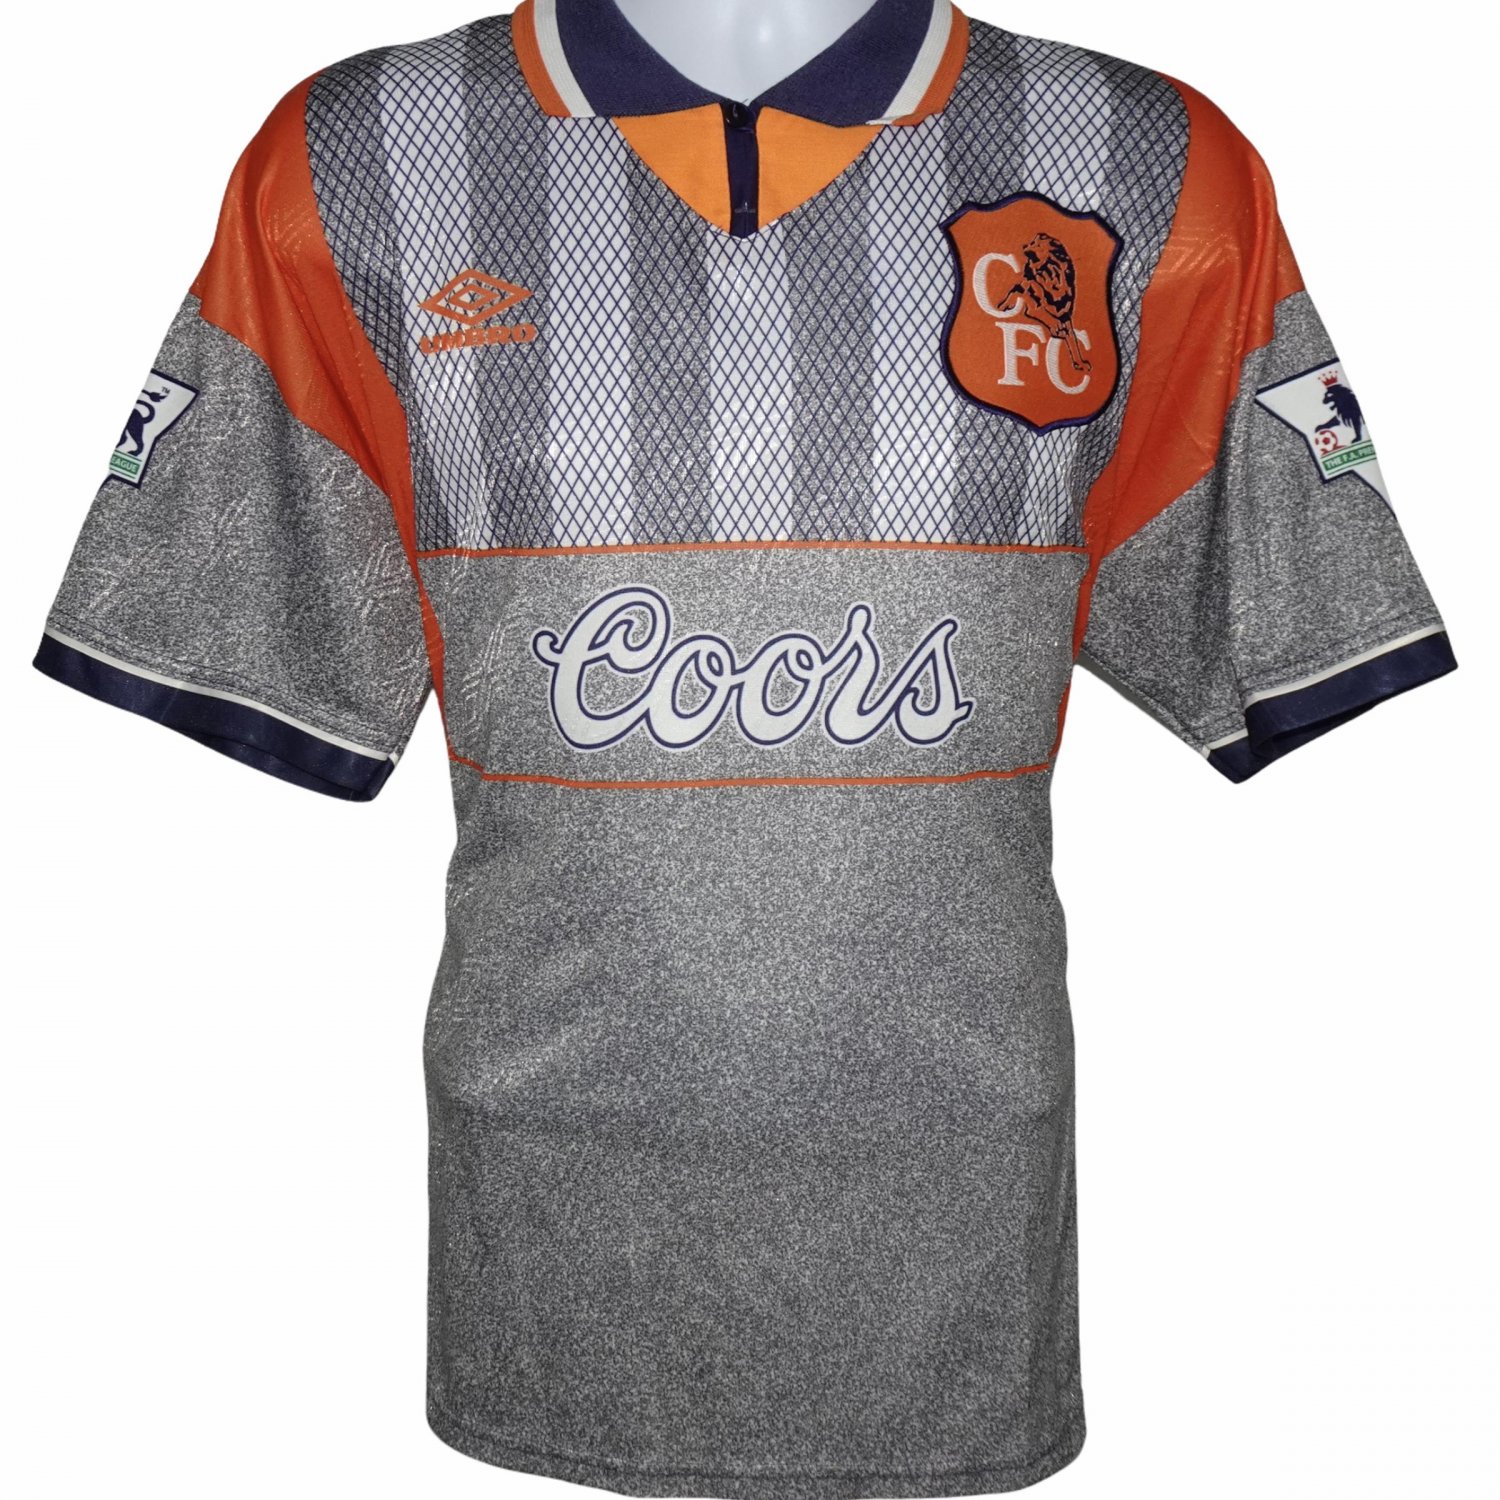 Chelsea Away football shirt 1994 - 1996. Sponsored by Coors